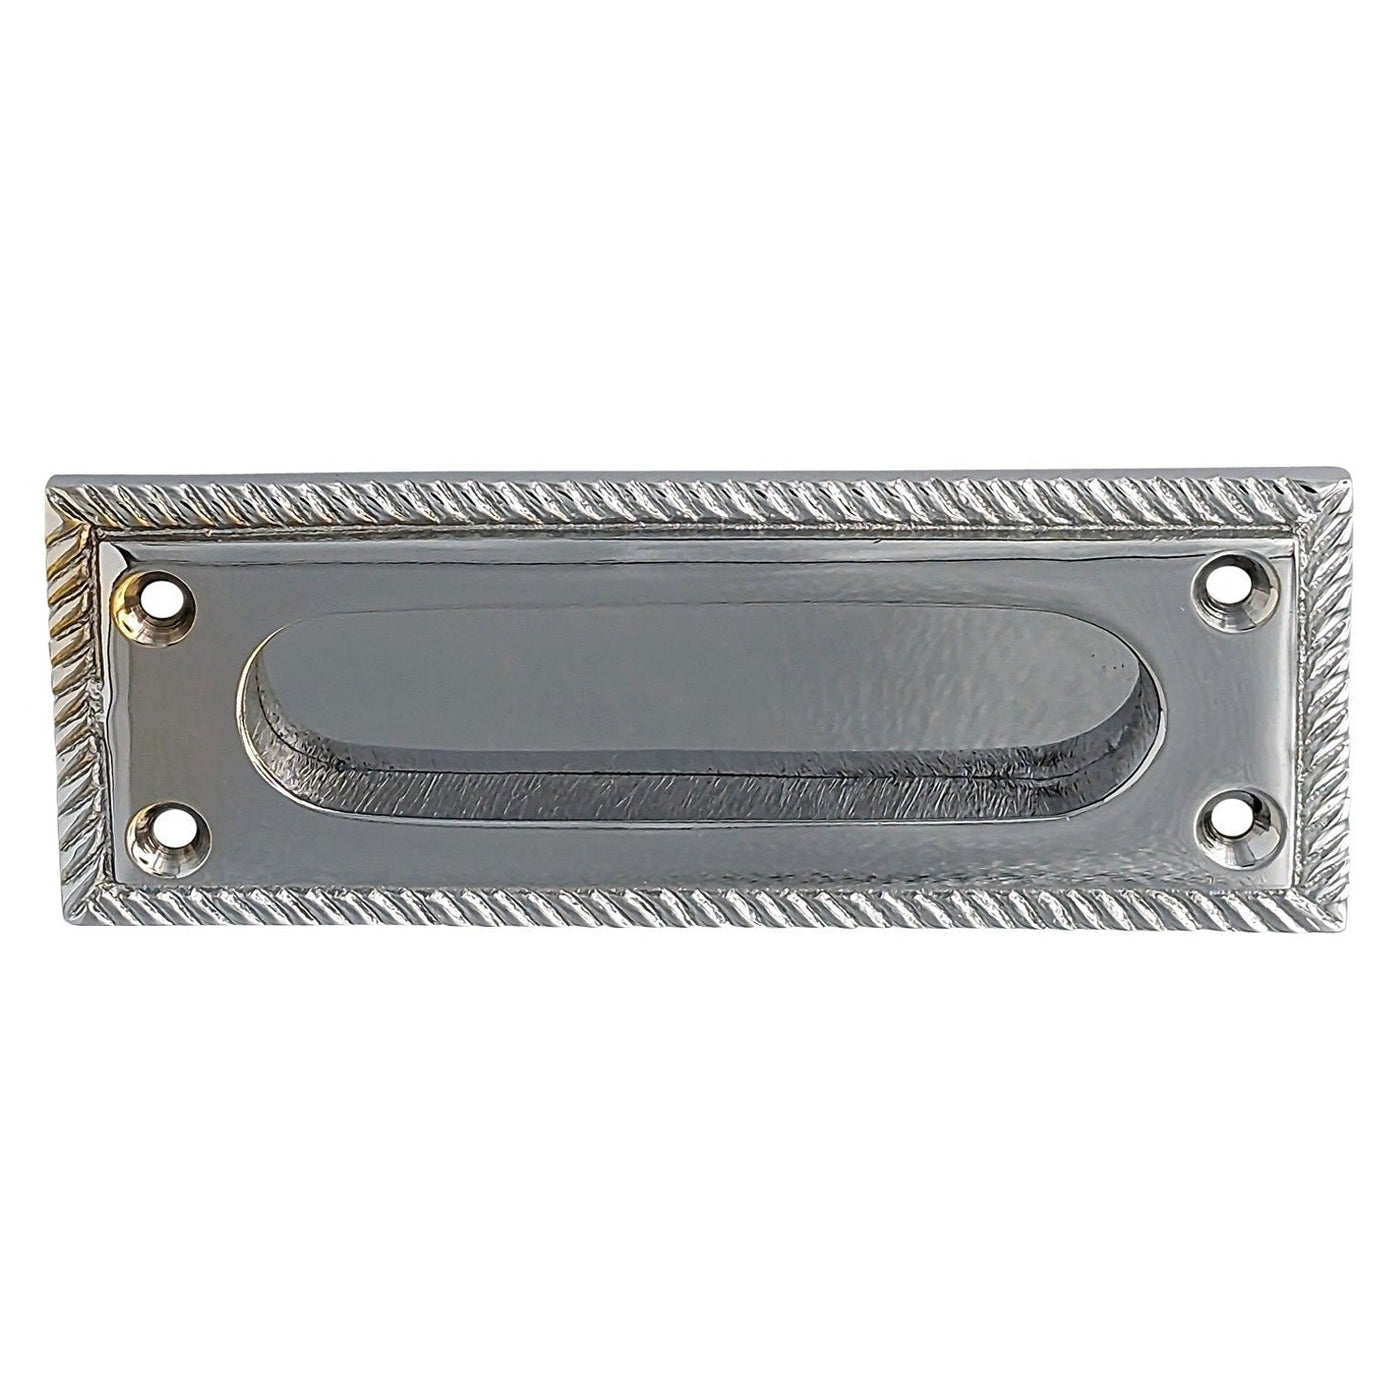 Rectangular Georgian Roped Solid Brass Window Sash Pull (Several Finishes Available)